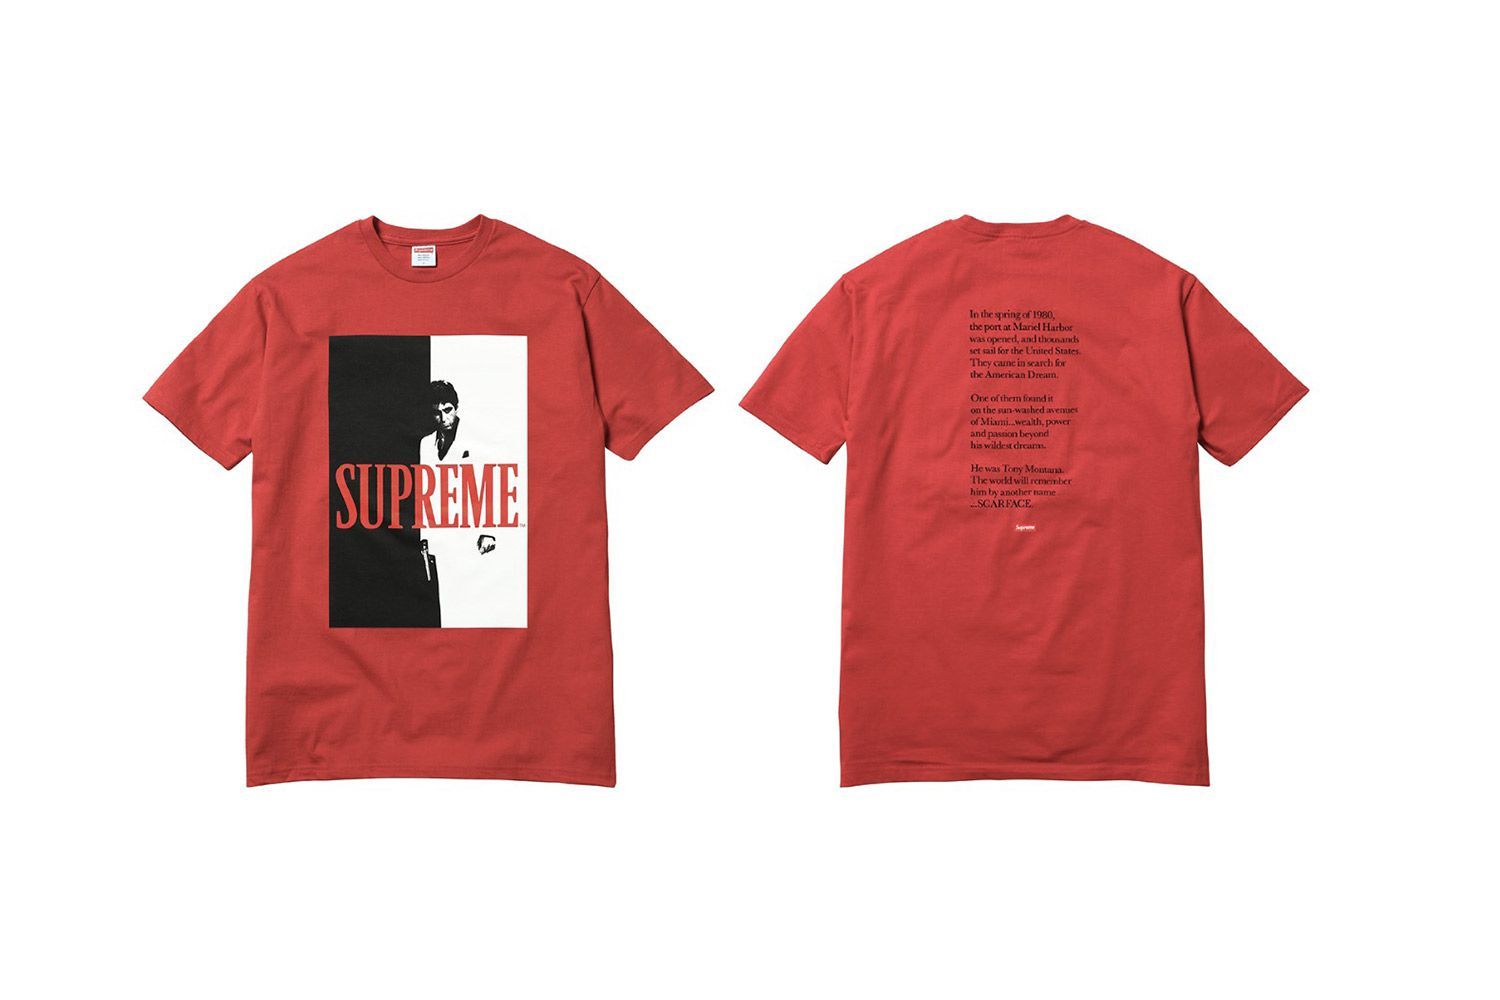 All the prices of the Supreme x Scarface capsule collection